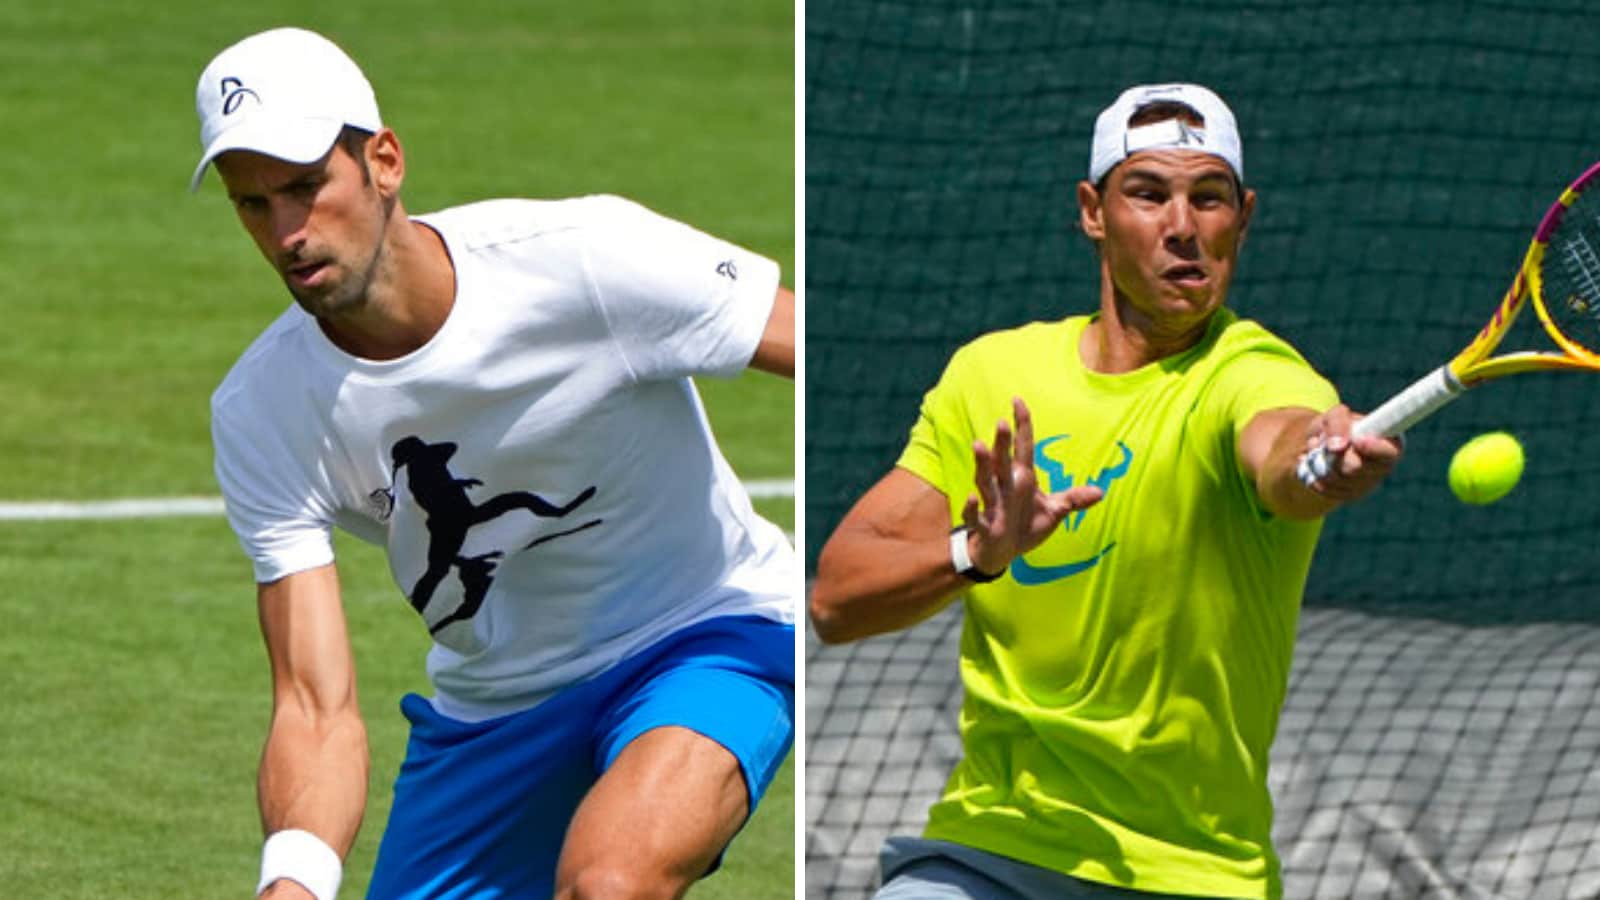 no-russians-and-no-points-nadal-and-djokovic-sweat-it-out-at-wimbledon-practice